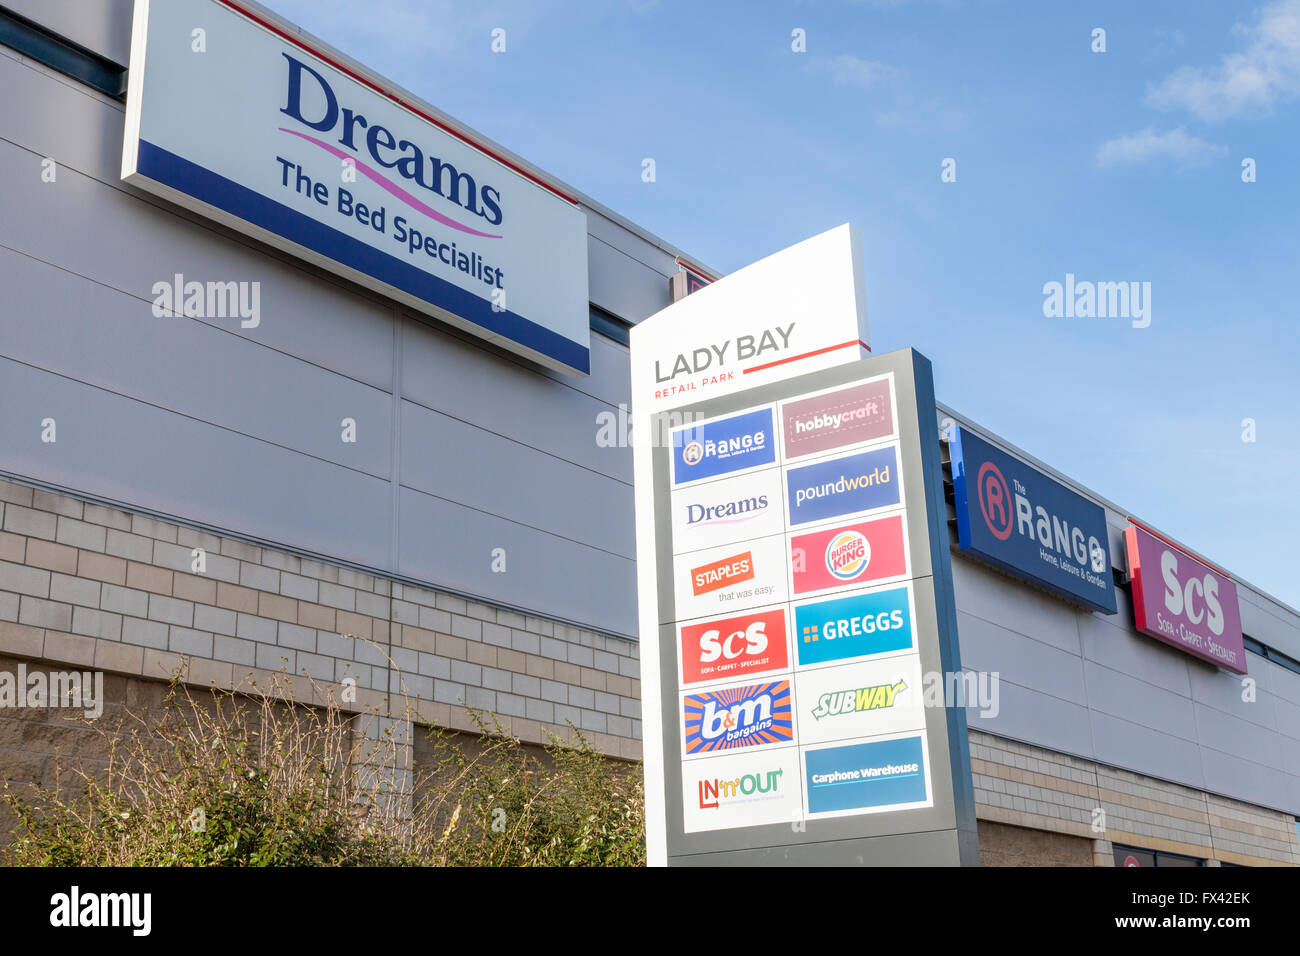 Store signs at Lady Bay Retail Park, Nottingham, England, UK Stock Photo